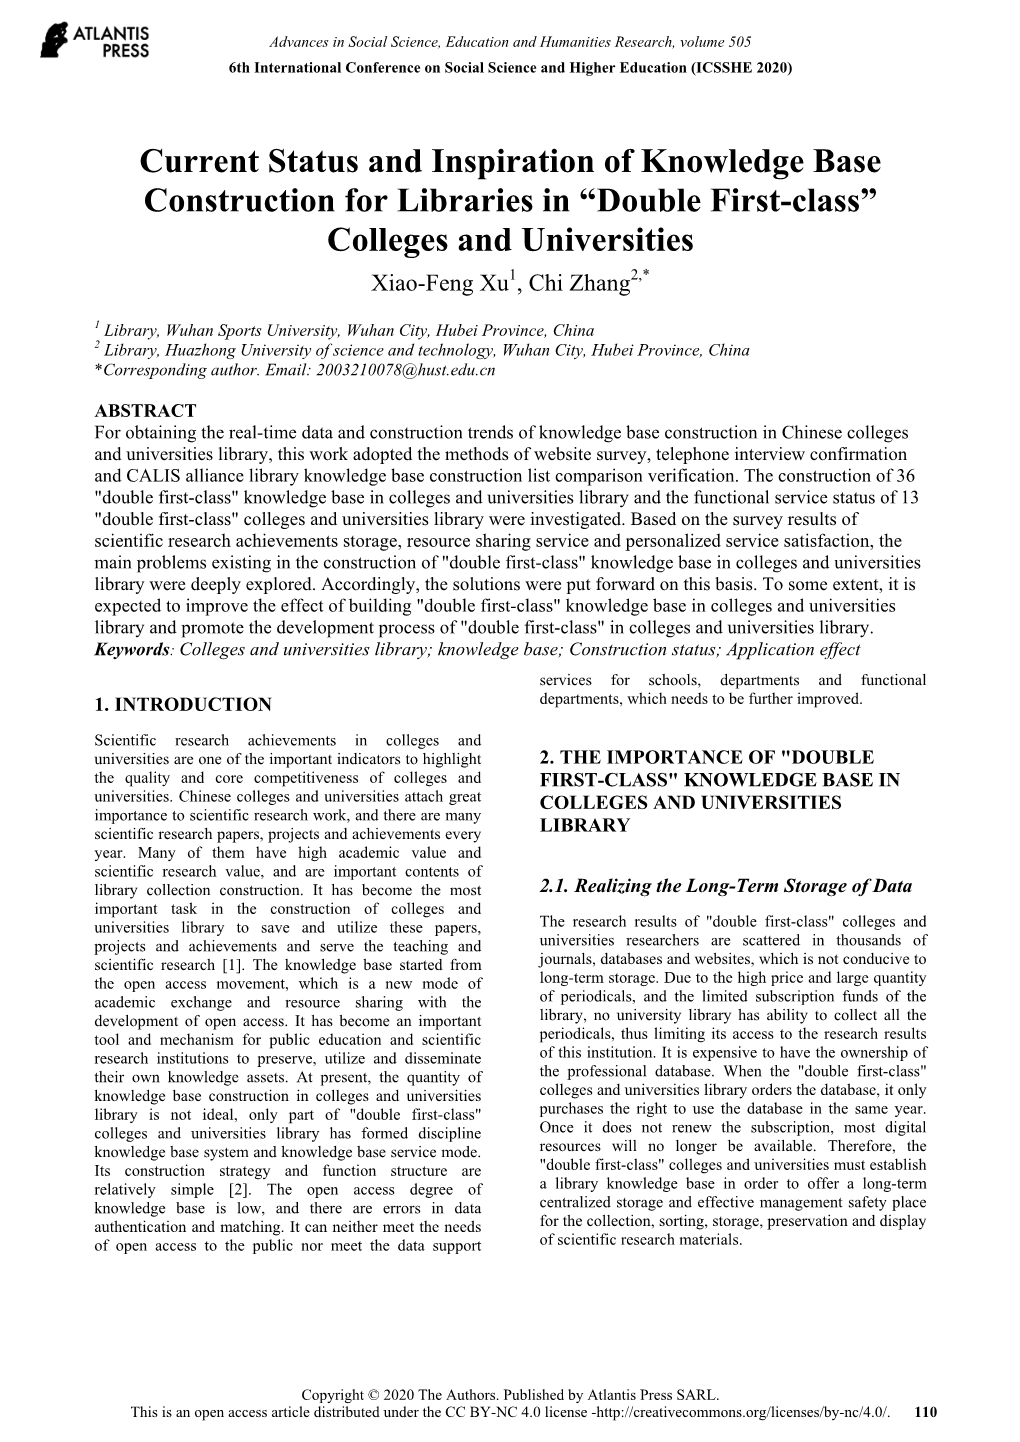 Current Status and Inspiration of Knowledge Base Construction for Libraries in “Double First-Class” Colleges and Universities Xiao-Feng Xu1, Chi Zhang2,*